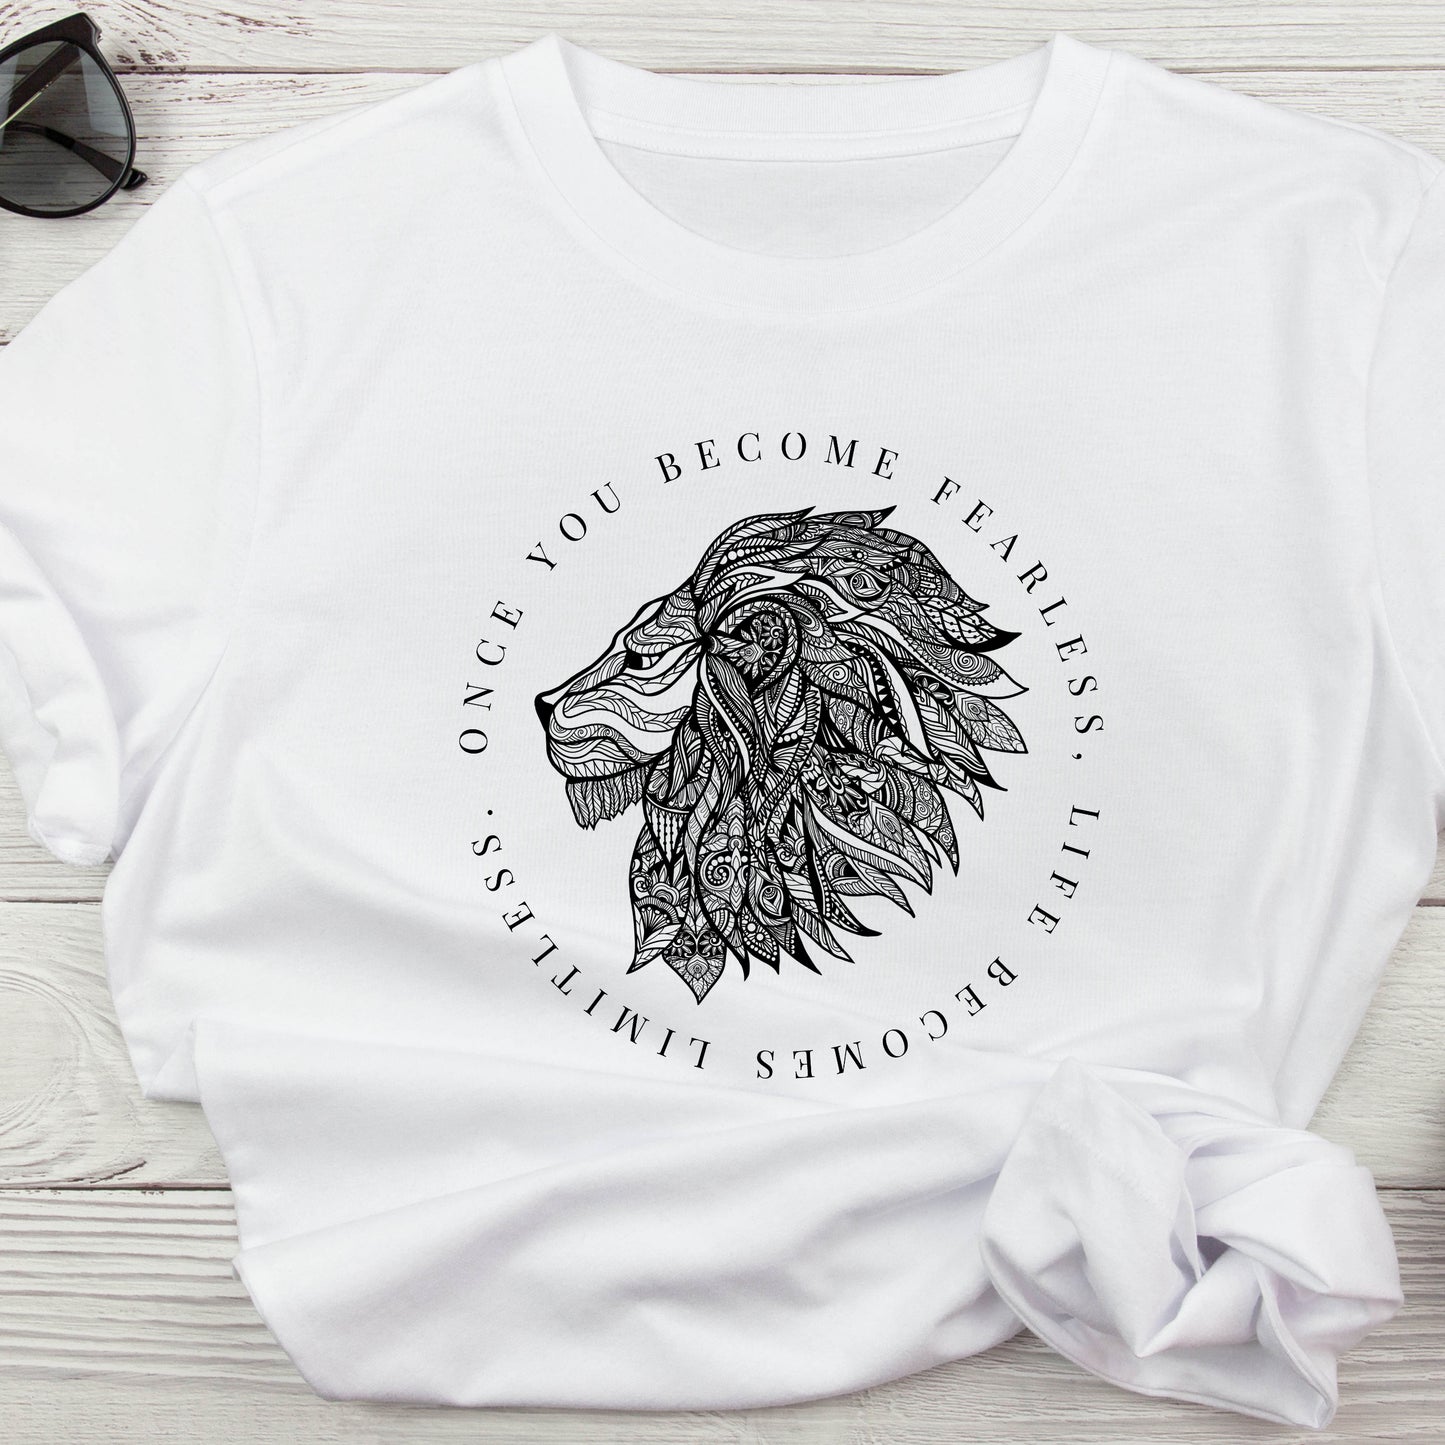 Lion T-Shirt For Fearless Lion TShirt For Limitless T Shirt Motivational Shirt For Leo T-Shirt For Leo Birthday Gift